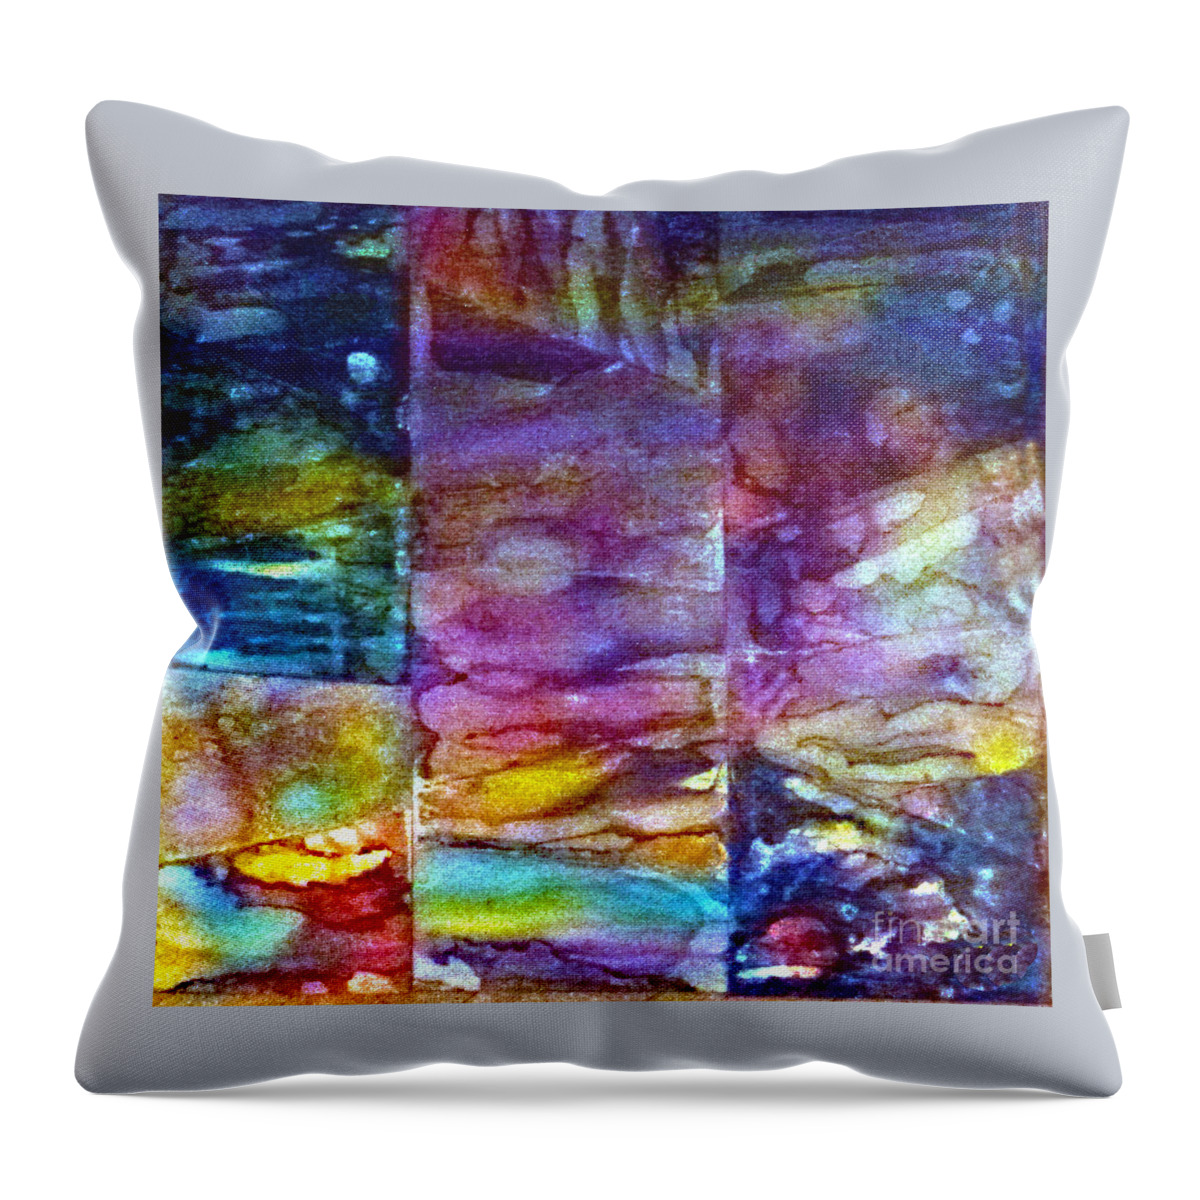 Colorful Throw Pillow featuring the painting Jubilation by Alene Sirott-Cope